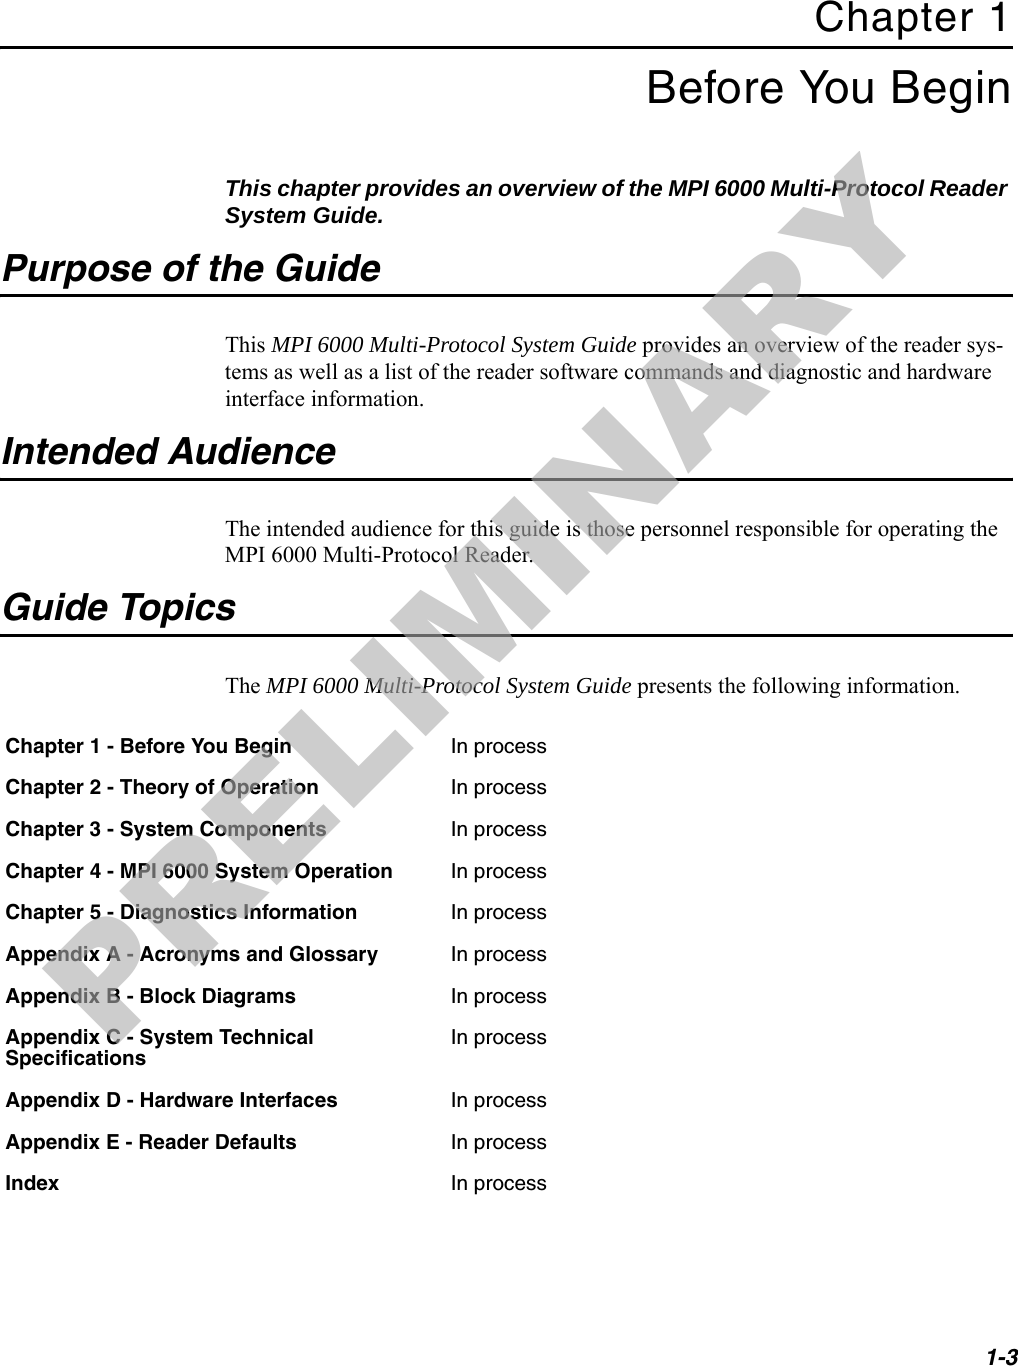 1-3Chapter 1Before You BeginThis chapter provides an overview of the MPI 6000 Multi-Protocol Reader System Guide.Purpose of the GuideThis MPI 6000 Multi-Protocol System Guide provides an overview of the reader sys-tems as well as a list of the reader software commands and diagnostic and hardware interface information.Intended AudienceThe intended audience for this guide is those personnel responsible for operating the MPI 6000 Multi-Protocol Reader.Guide TopicsThe MPI 6000 Multi-Protocol System Guide presents the following information.Chapter 1 - Before You Begin In processChapter 2 - Theory of Operation In processChapter 3 - System Components In processChapter 4 - MPI 6000 System Operation In processChapter 5 - Diagnostics Information In processAppendix A - Acronyms and Glossary In processAppendix B - Block Diagrams In processAppendix C - System Technical SpecificationsIn processAppendix D - Hardware Interfaces In processAppendix E - Reader Defaults In processIndex In processPRELIMINARY